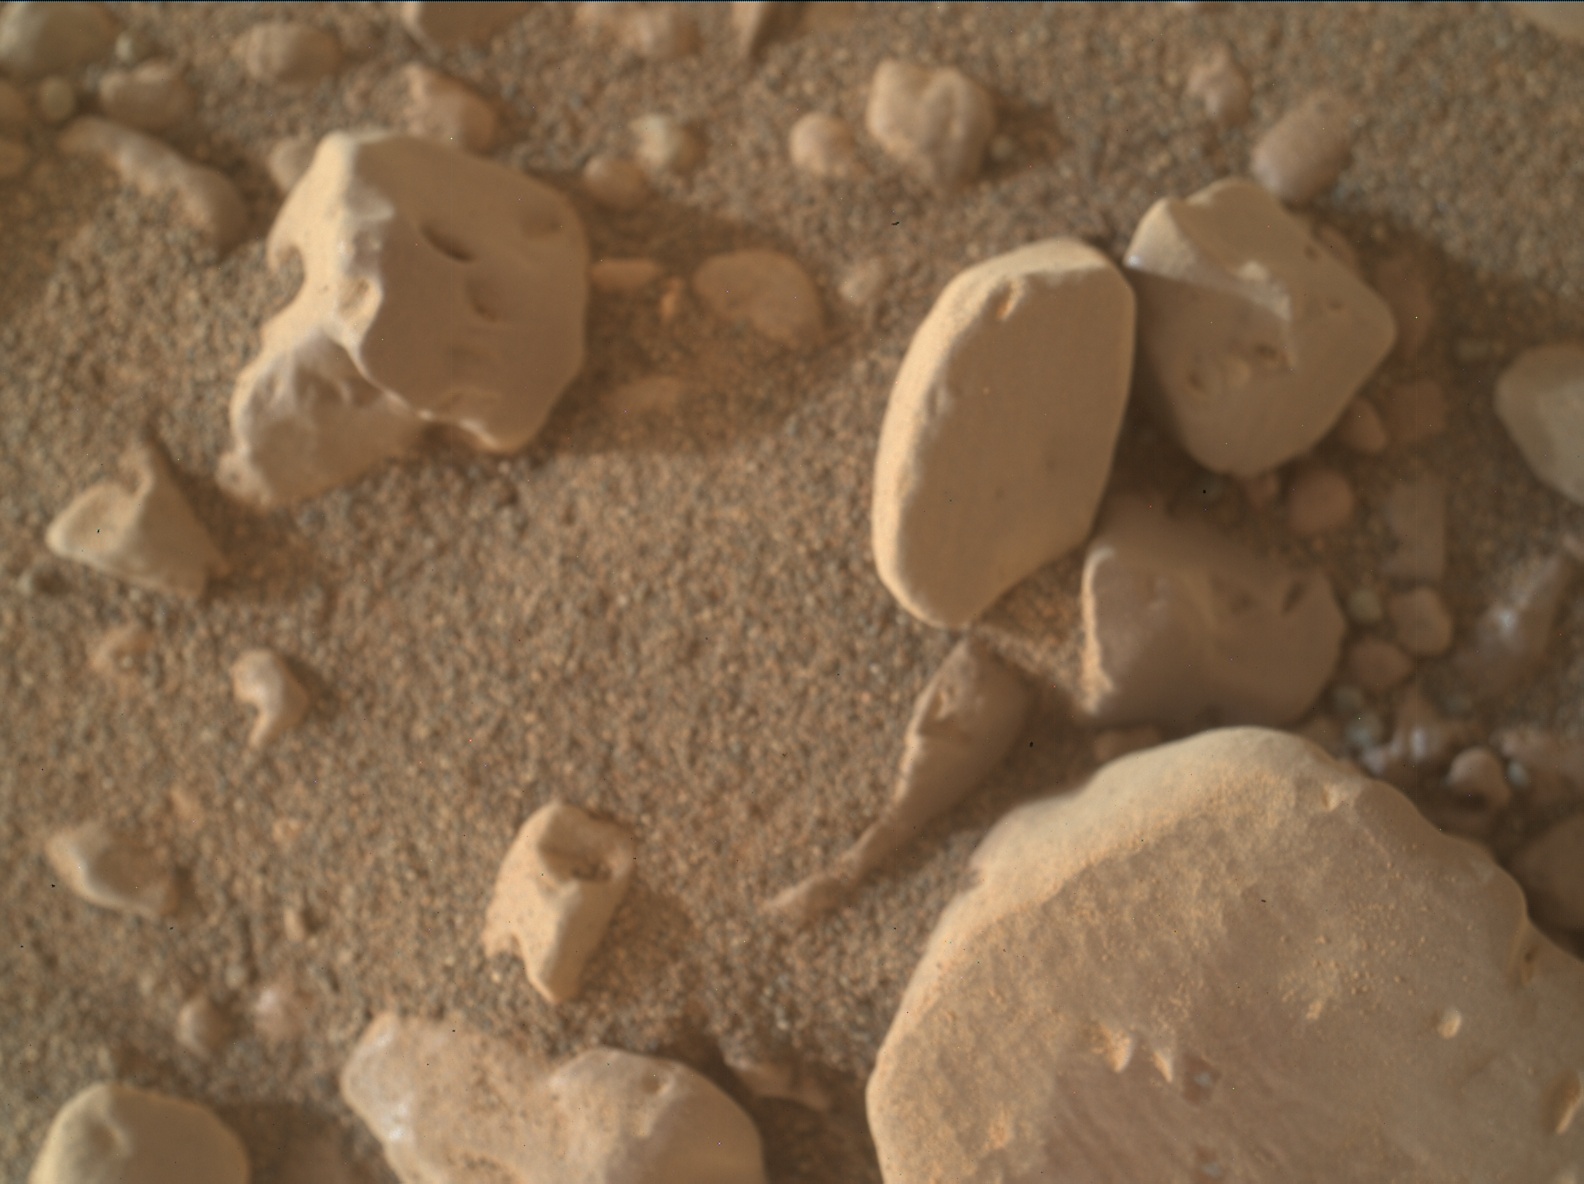 Nasa's Mars rover Curiosity acquired this image using its Mars Hand Lens Imager (MAHLI) on Sol 2308